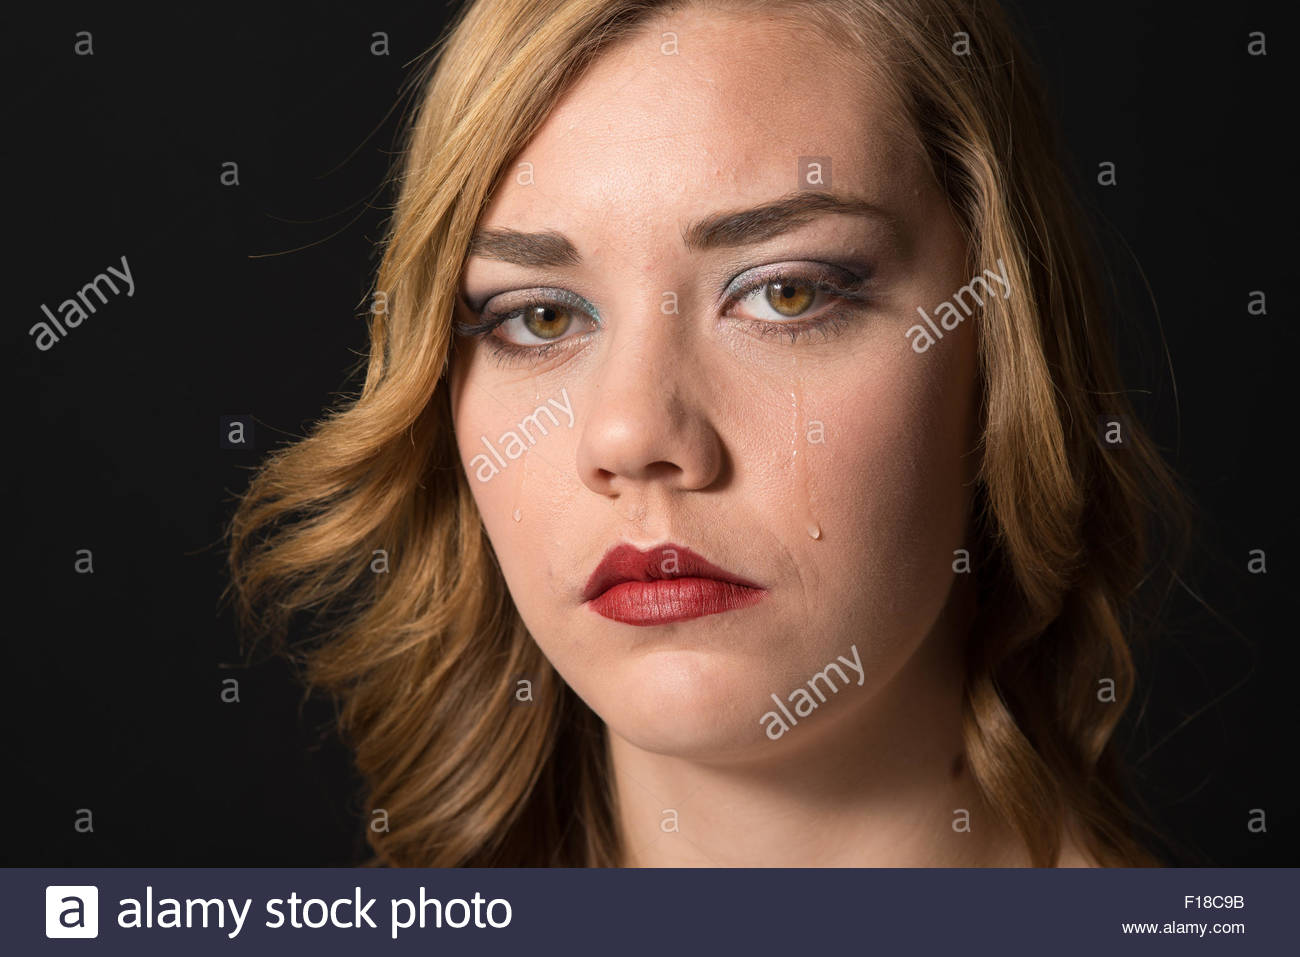 Teen Girl Crying Looking At The Camera With Tears On Hear Cheeks